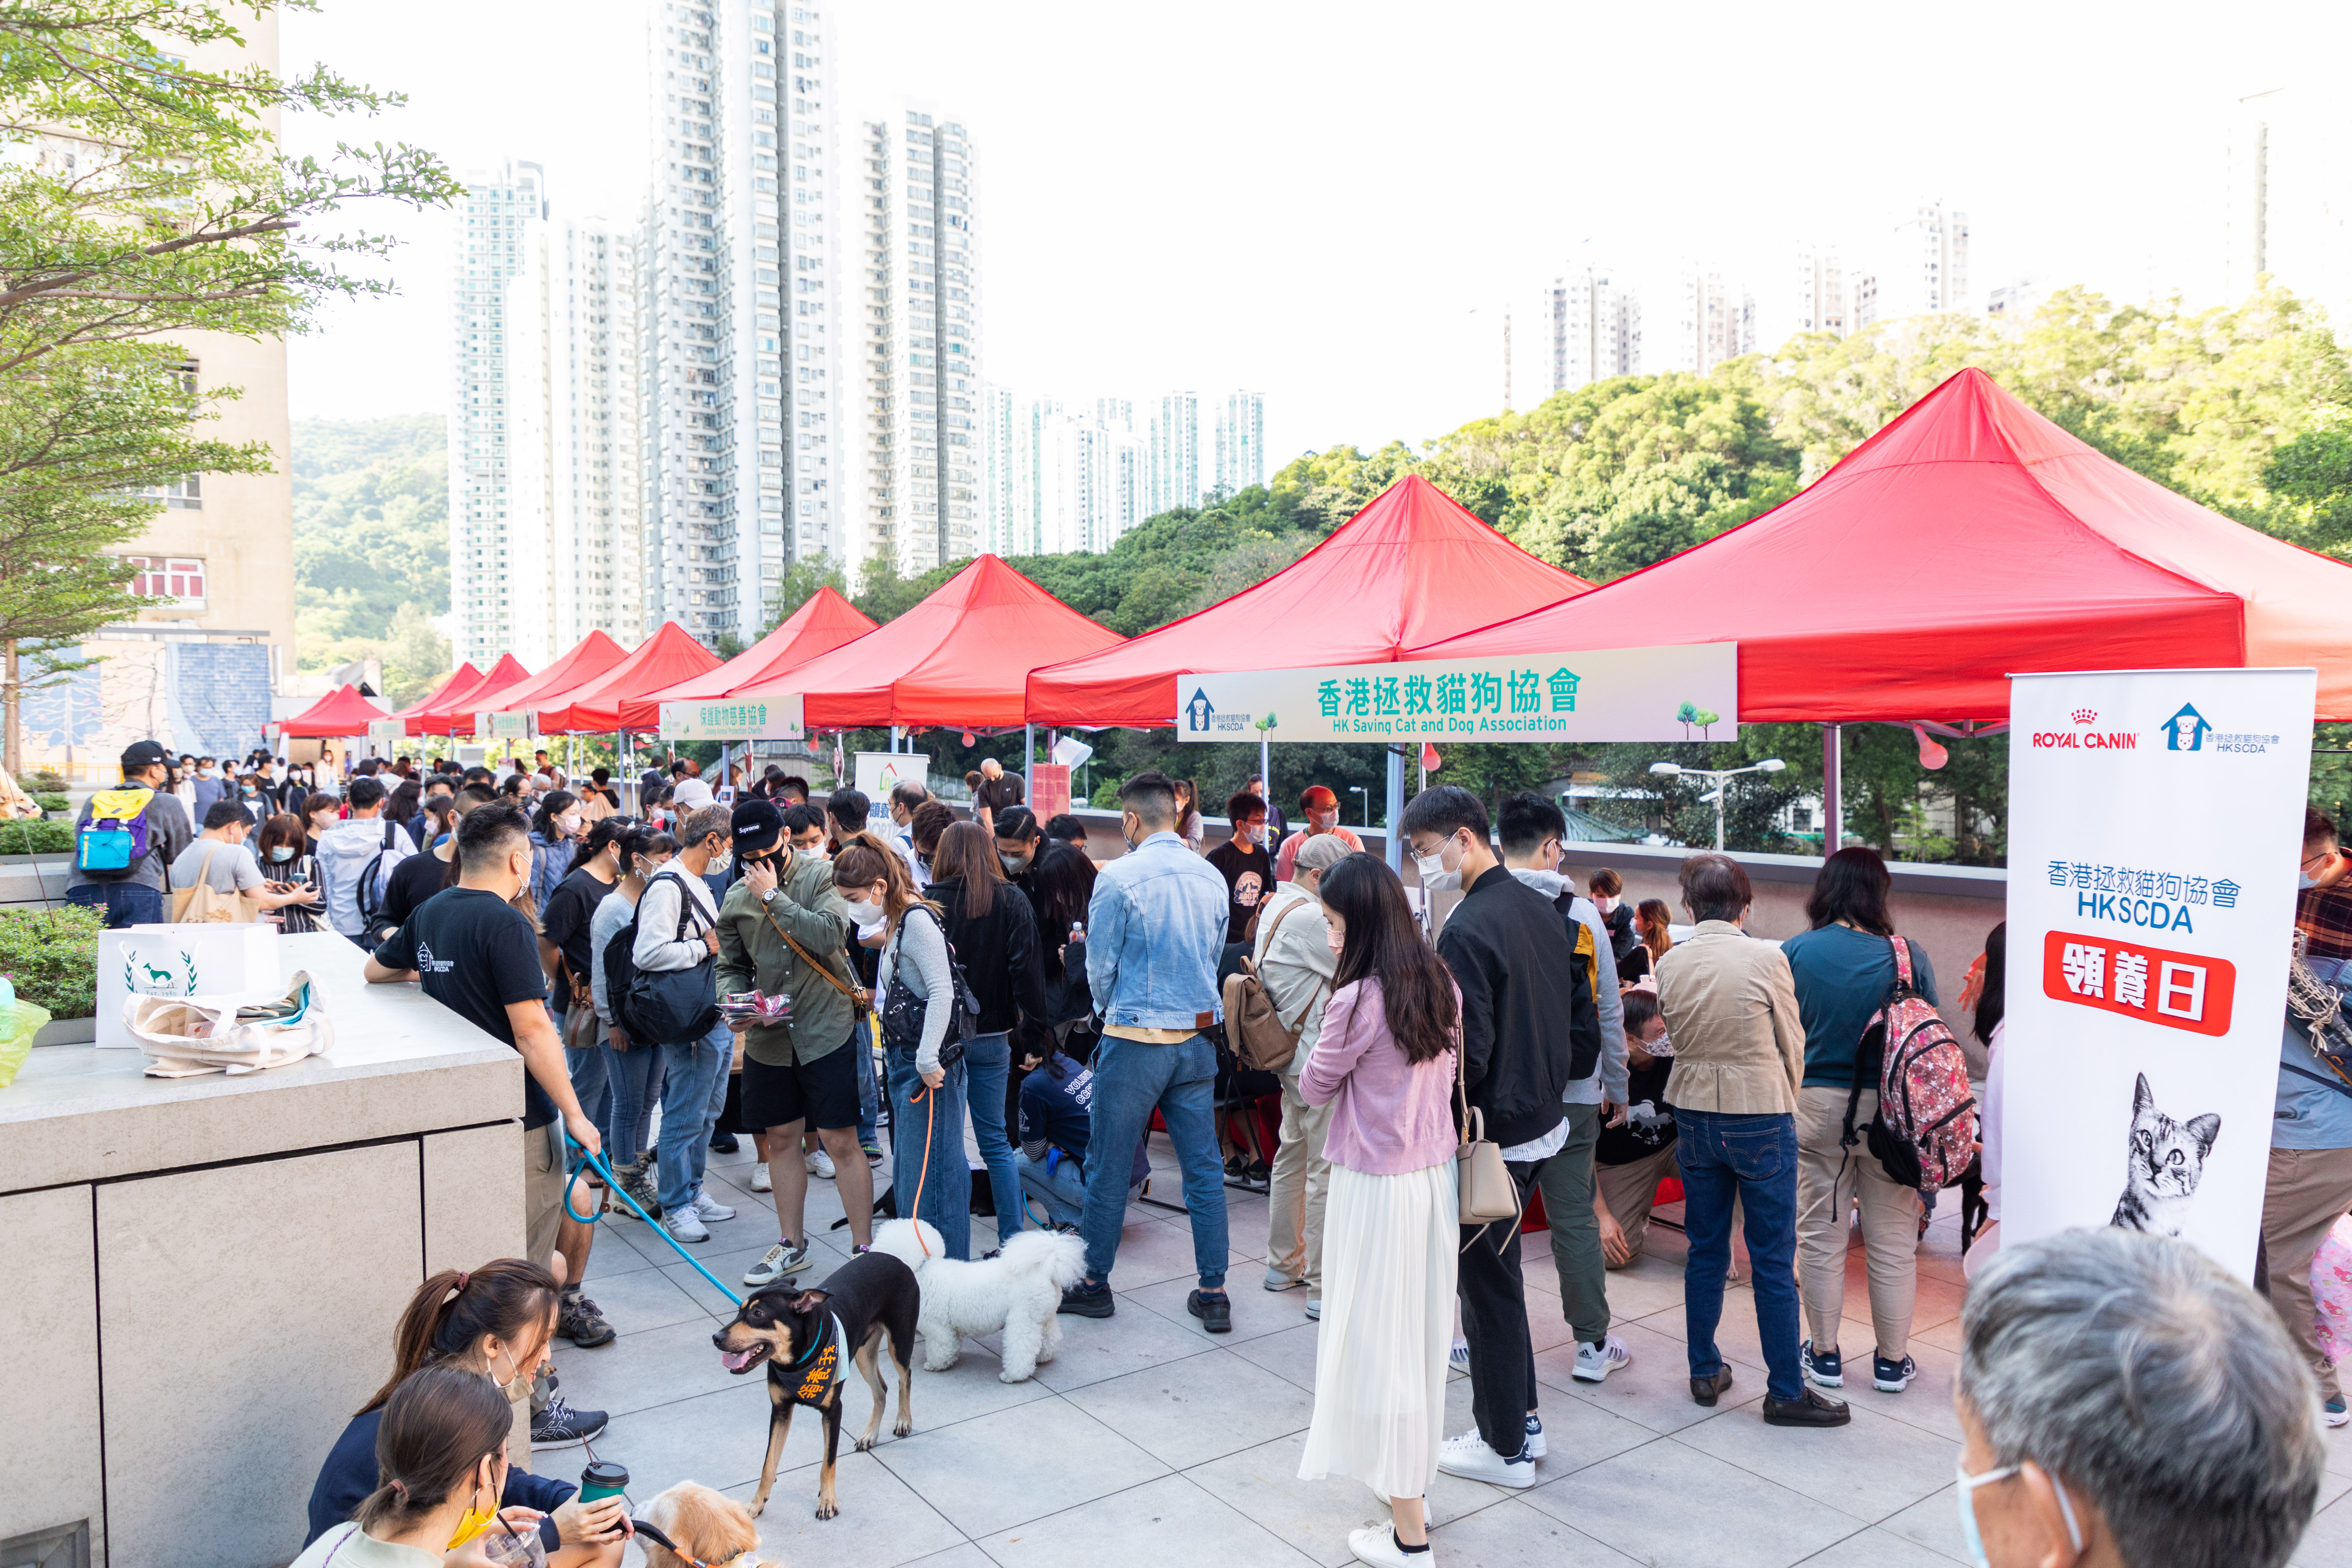 The Dog Adoption Carnival attracted over 10,350 visitors who enjoyed various activities at the event.